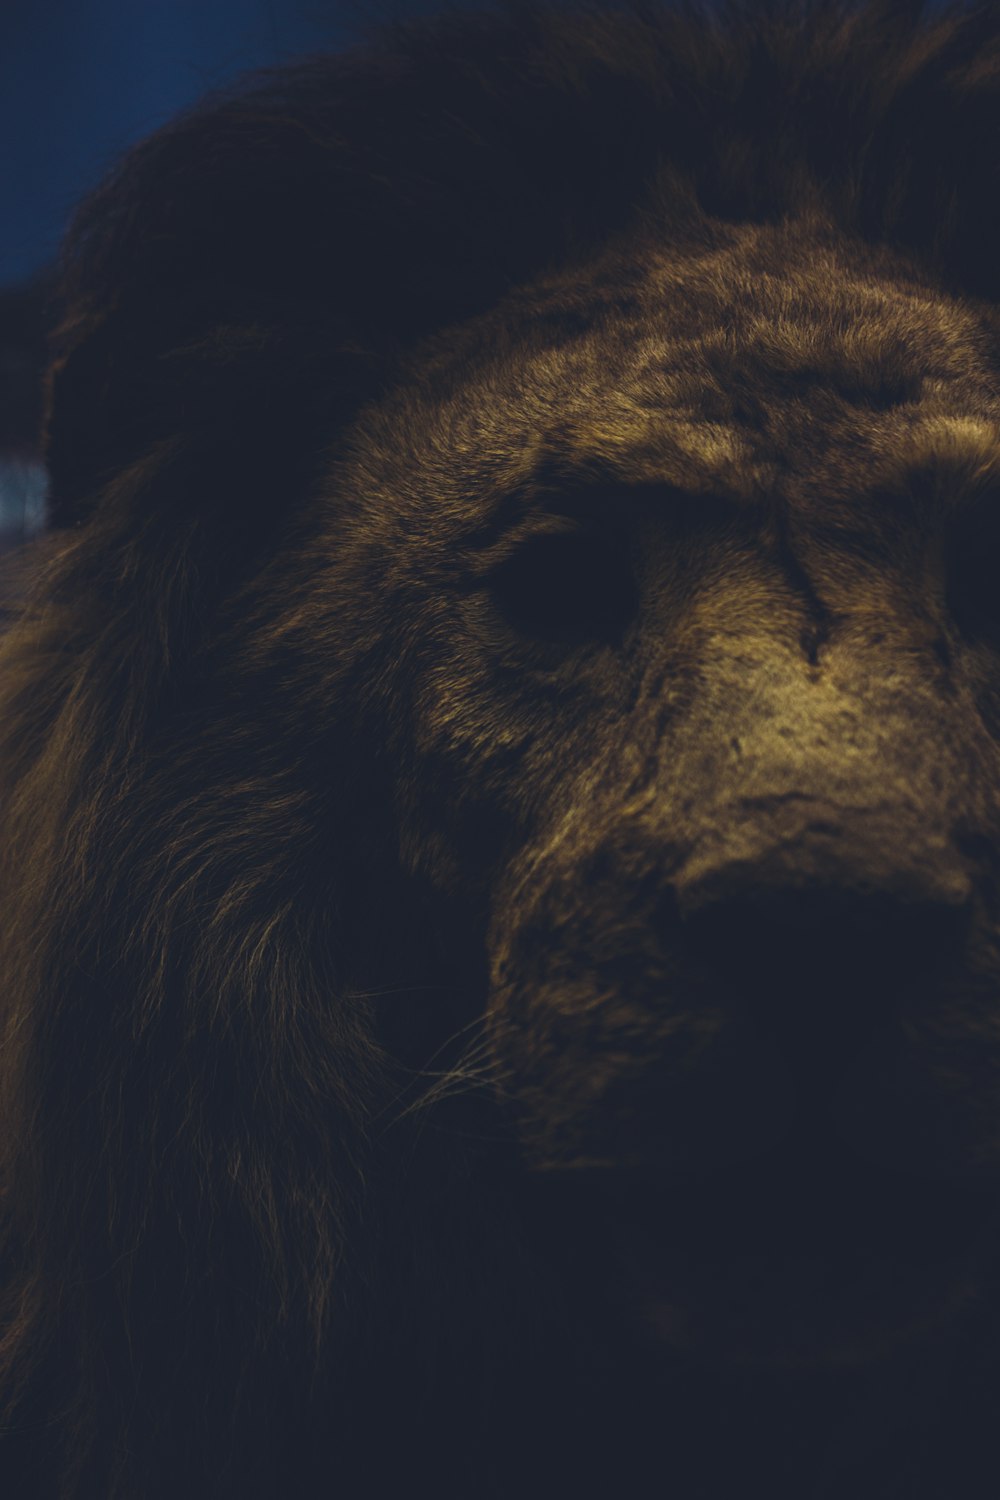 a close up of a lion's face with a blurry background